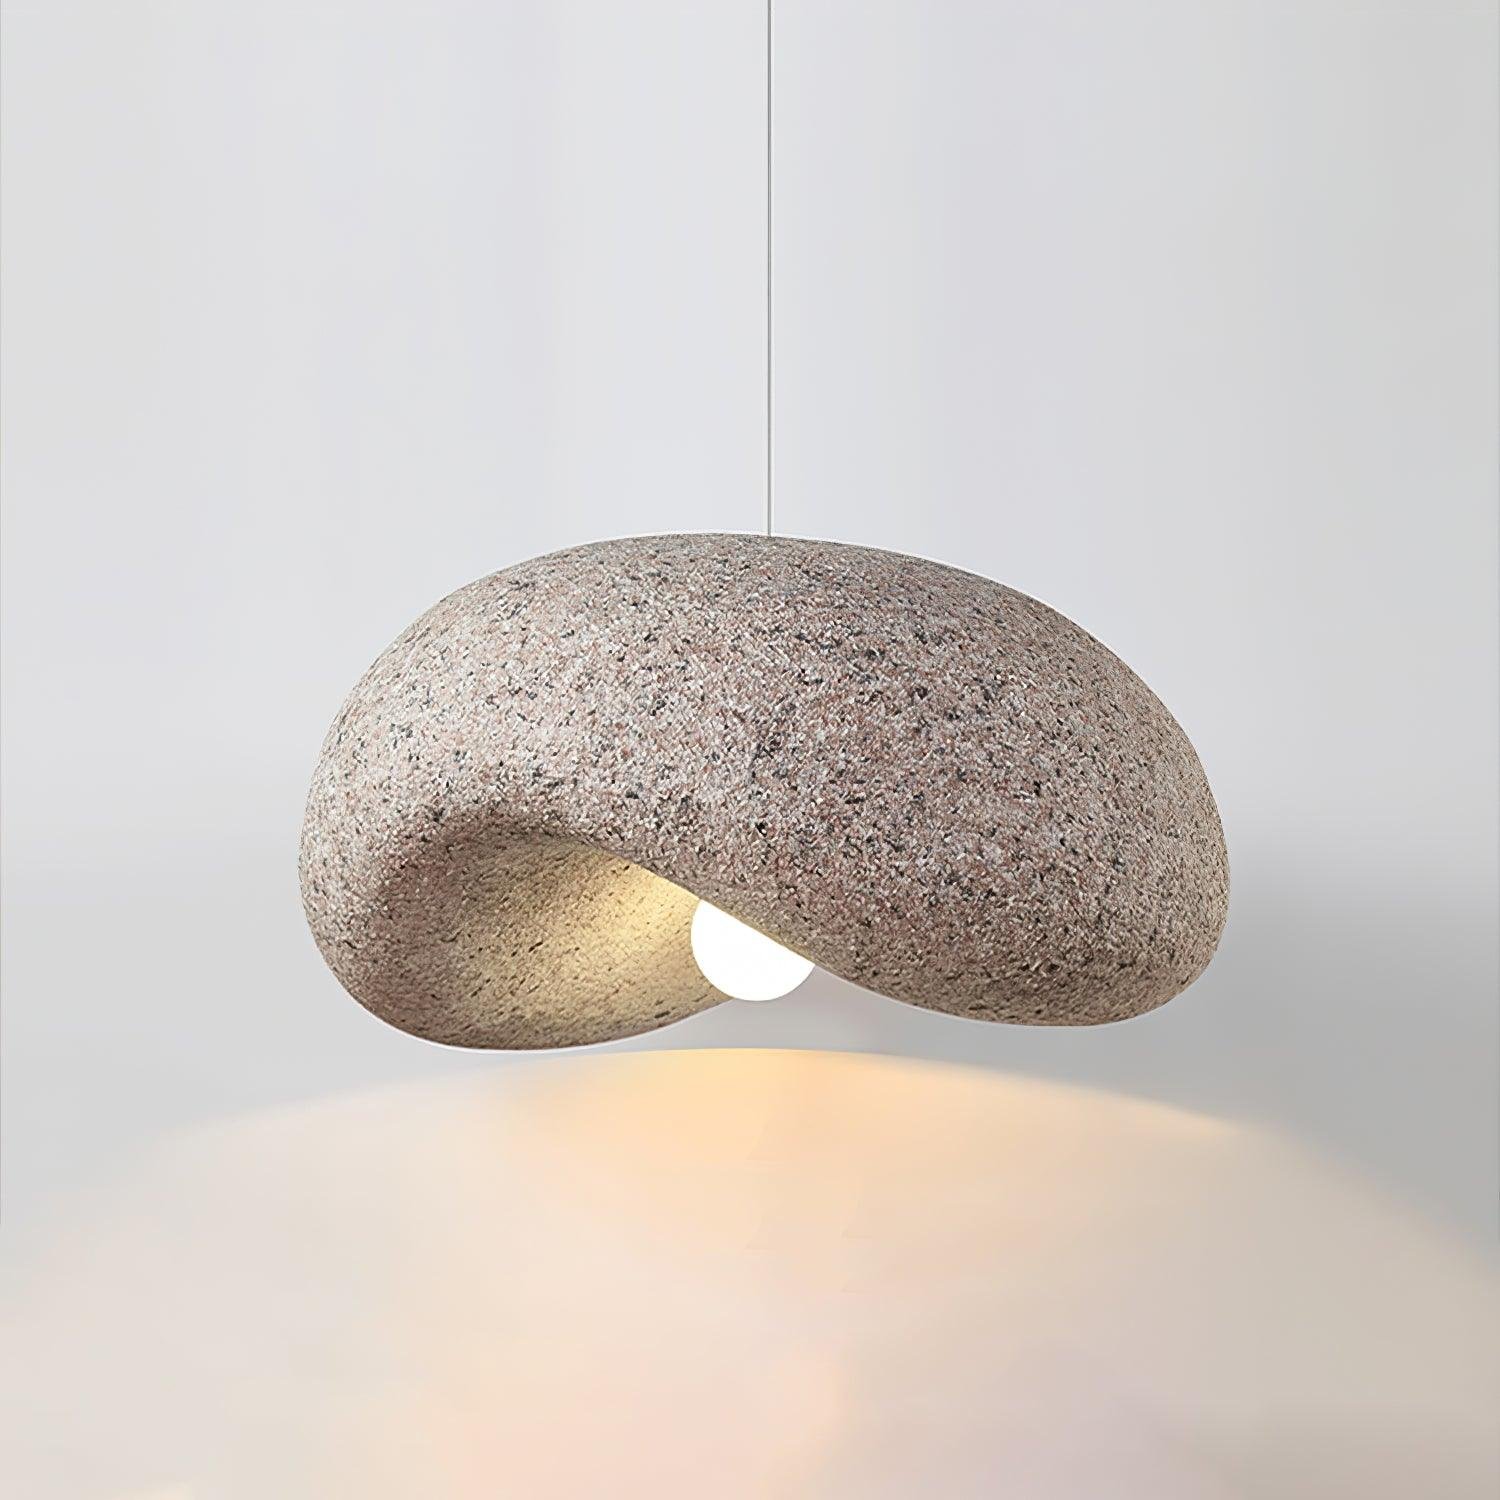 Speckled Pendant Lamp - Dunia, Diameter 23.6 inches x Height 9.8 inches, or Diameter 60cm x Height 25cm, in Light Pink.